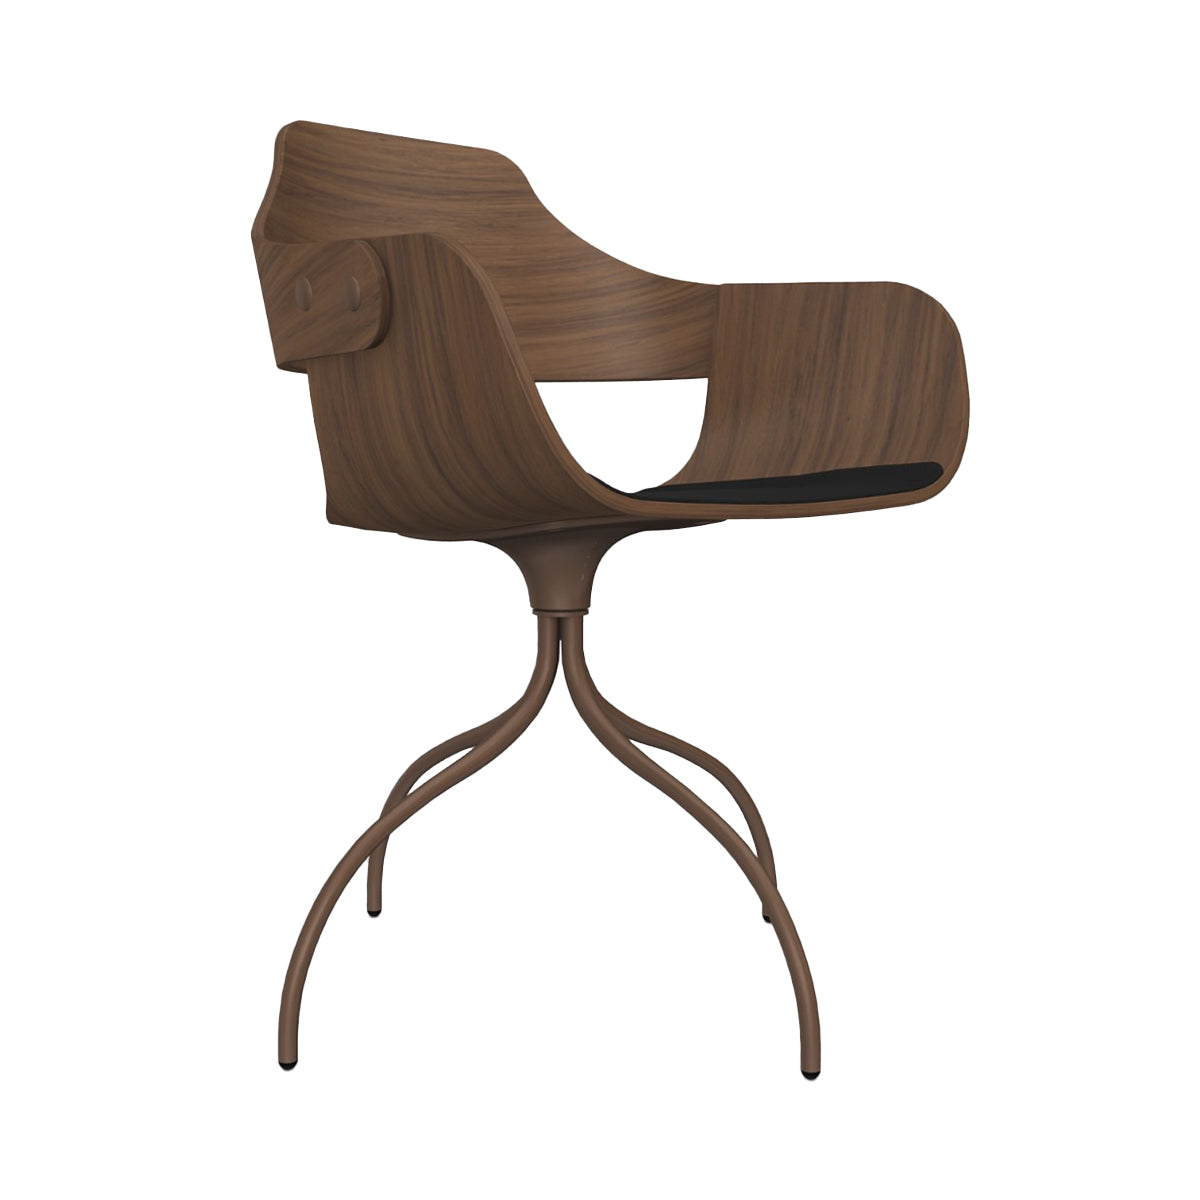 Showtime Chair with Swivel Base: Seat Upholstered + Pale Brown